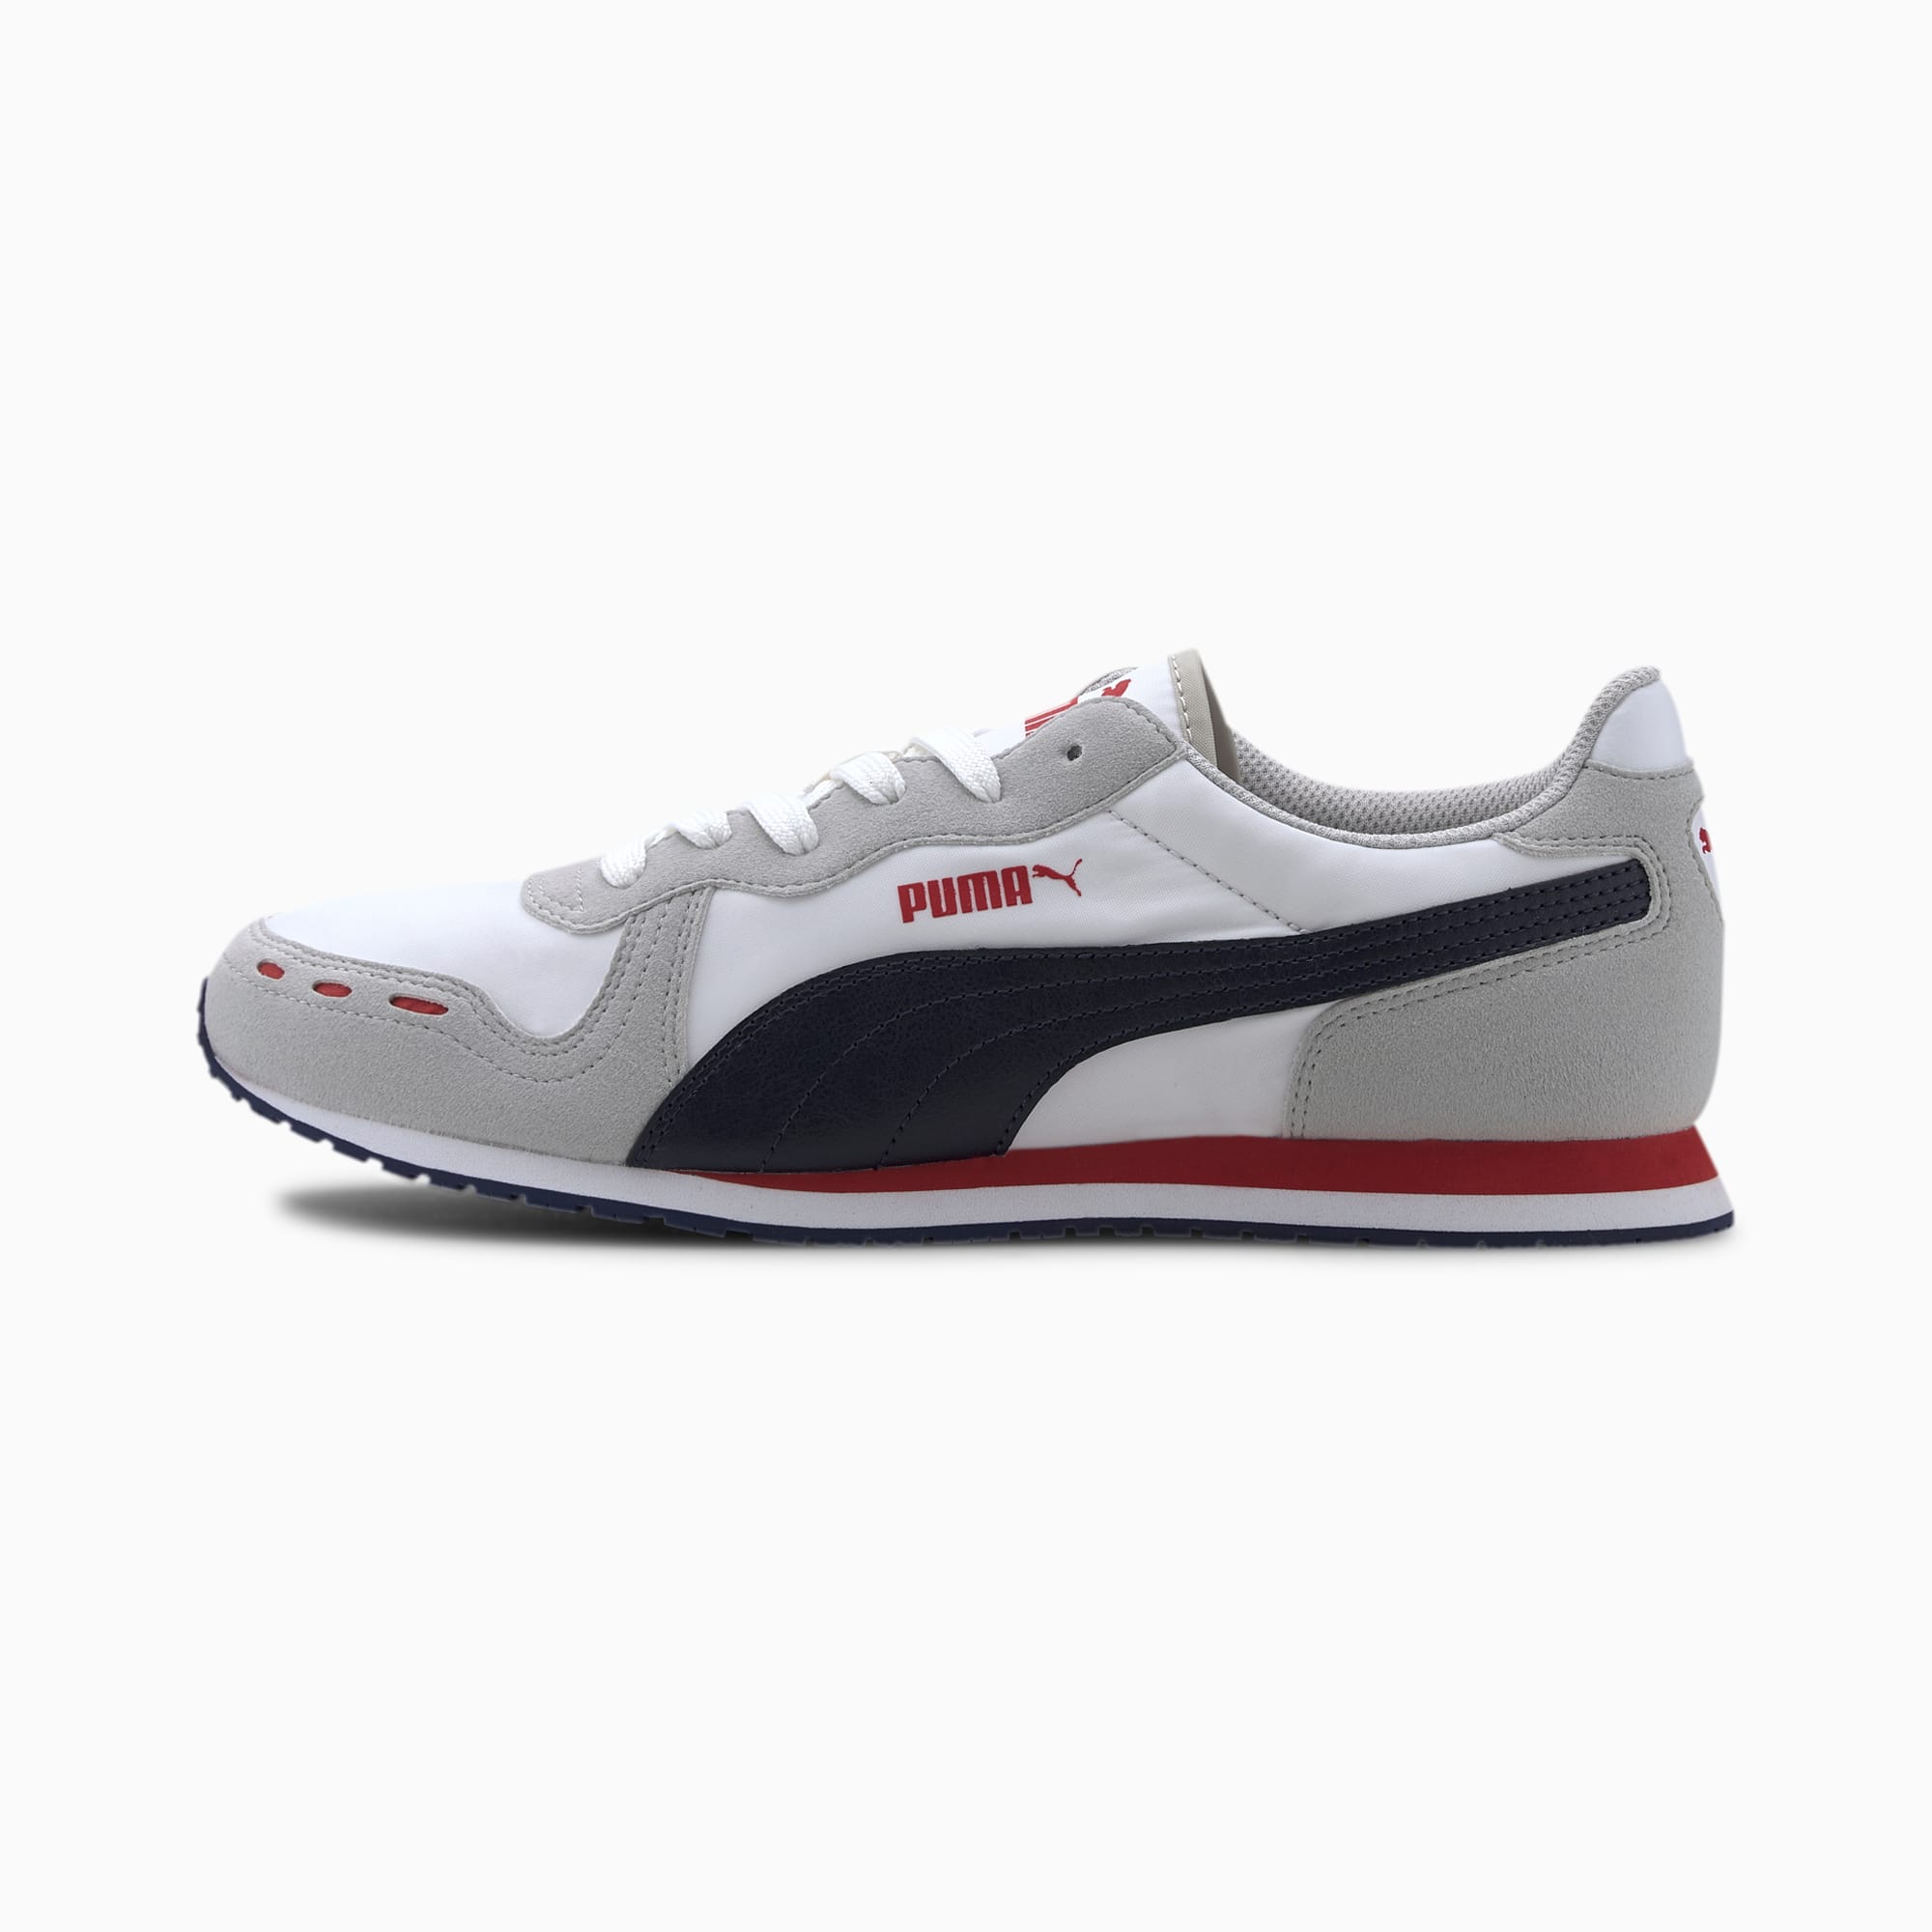 puma complete running shoes